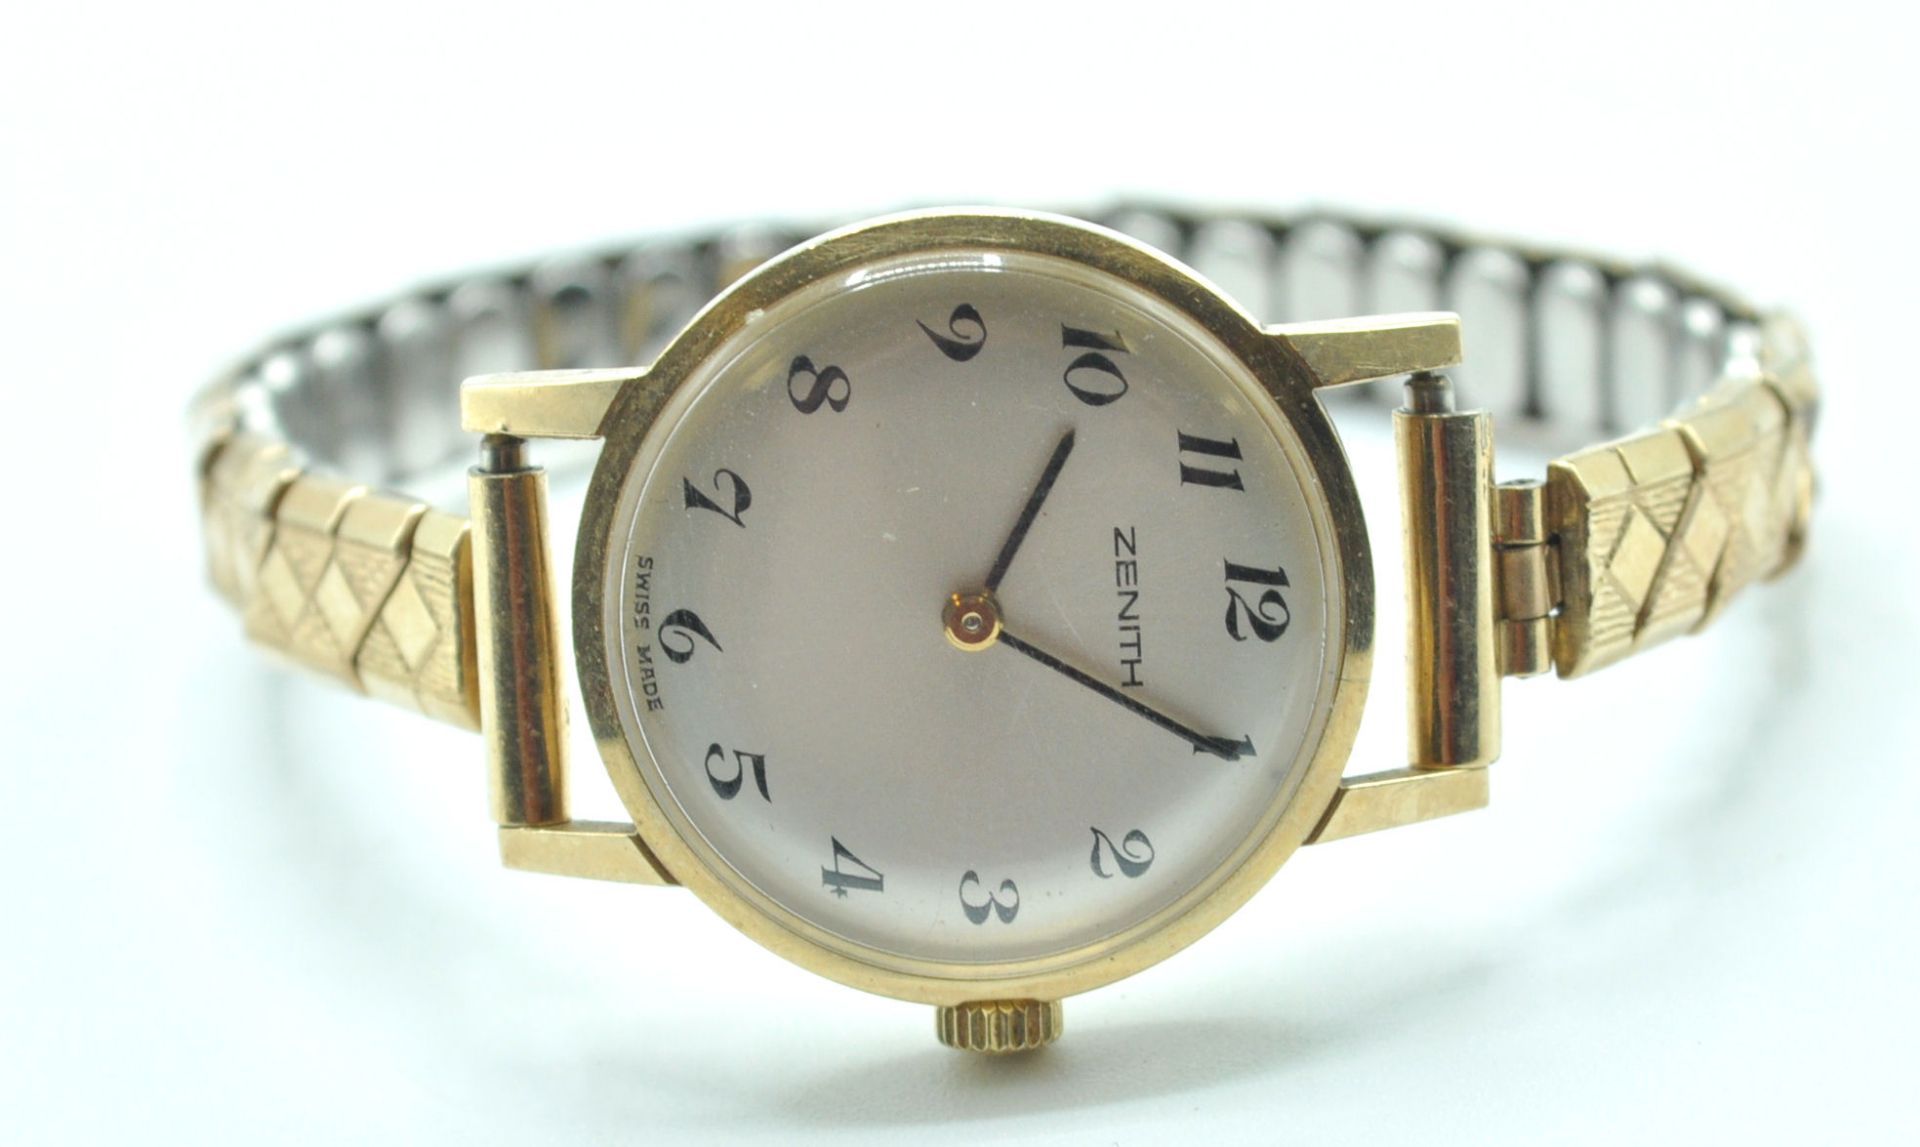 20TH CENTURY 17 JEWELS ZENITH LADIS WATCH IN A 9CT GOLD CASE.